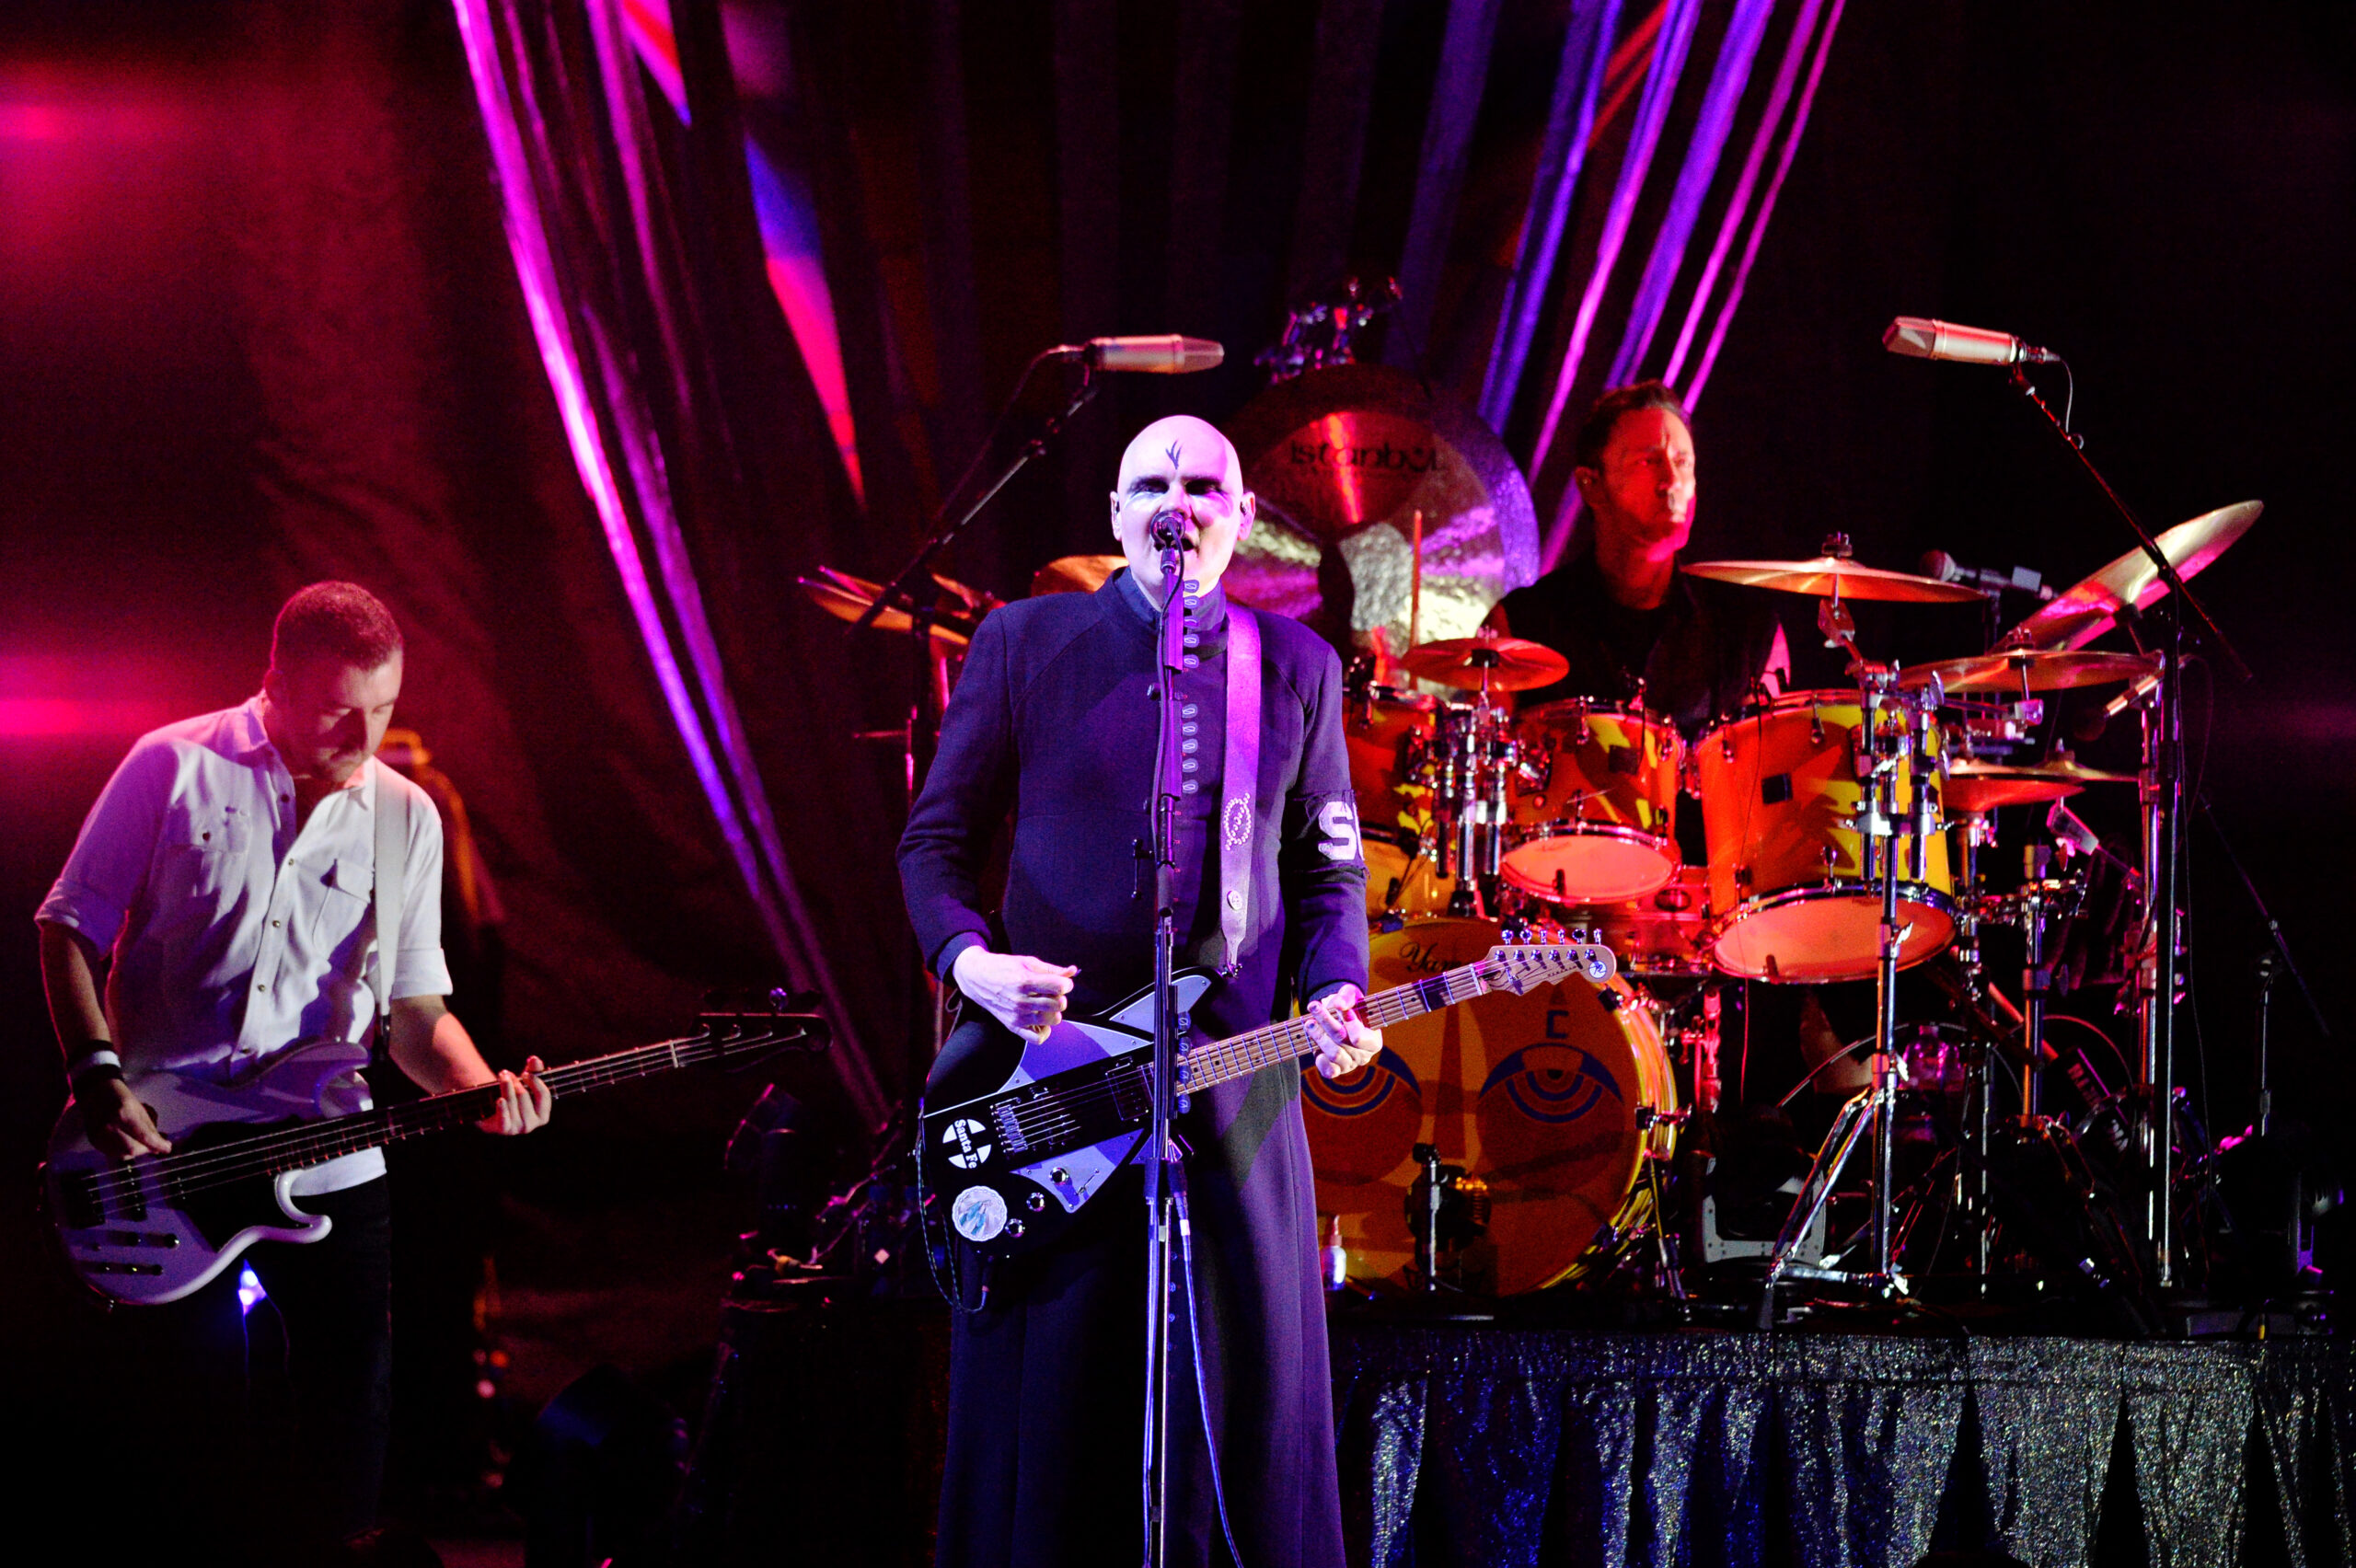 Smashing Pumpkins perform 'Quiet' for the first time in 27 years